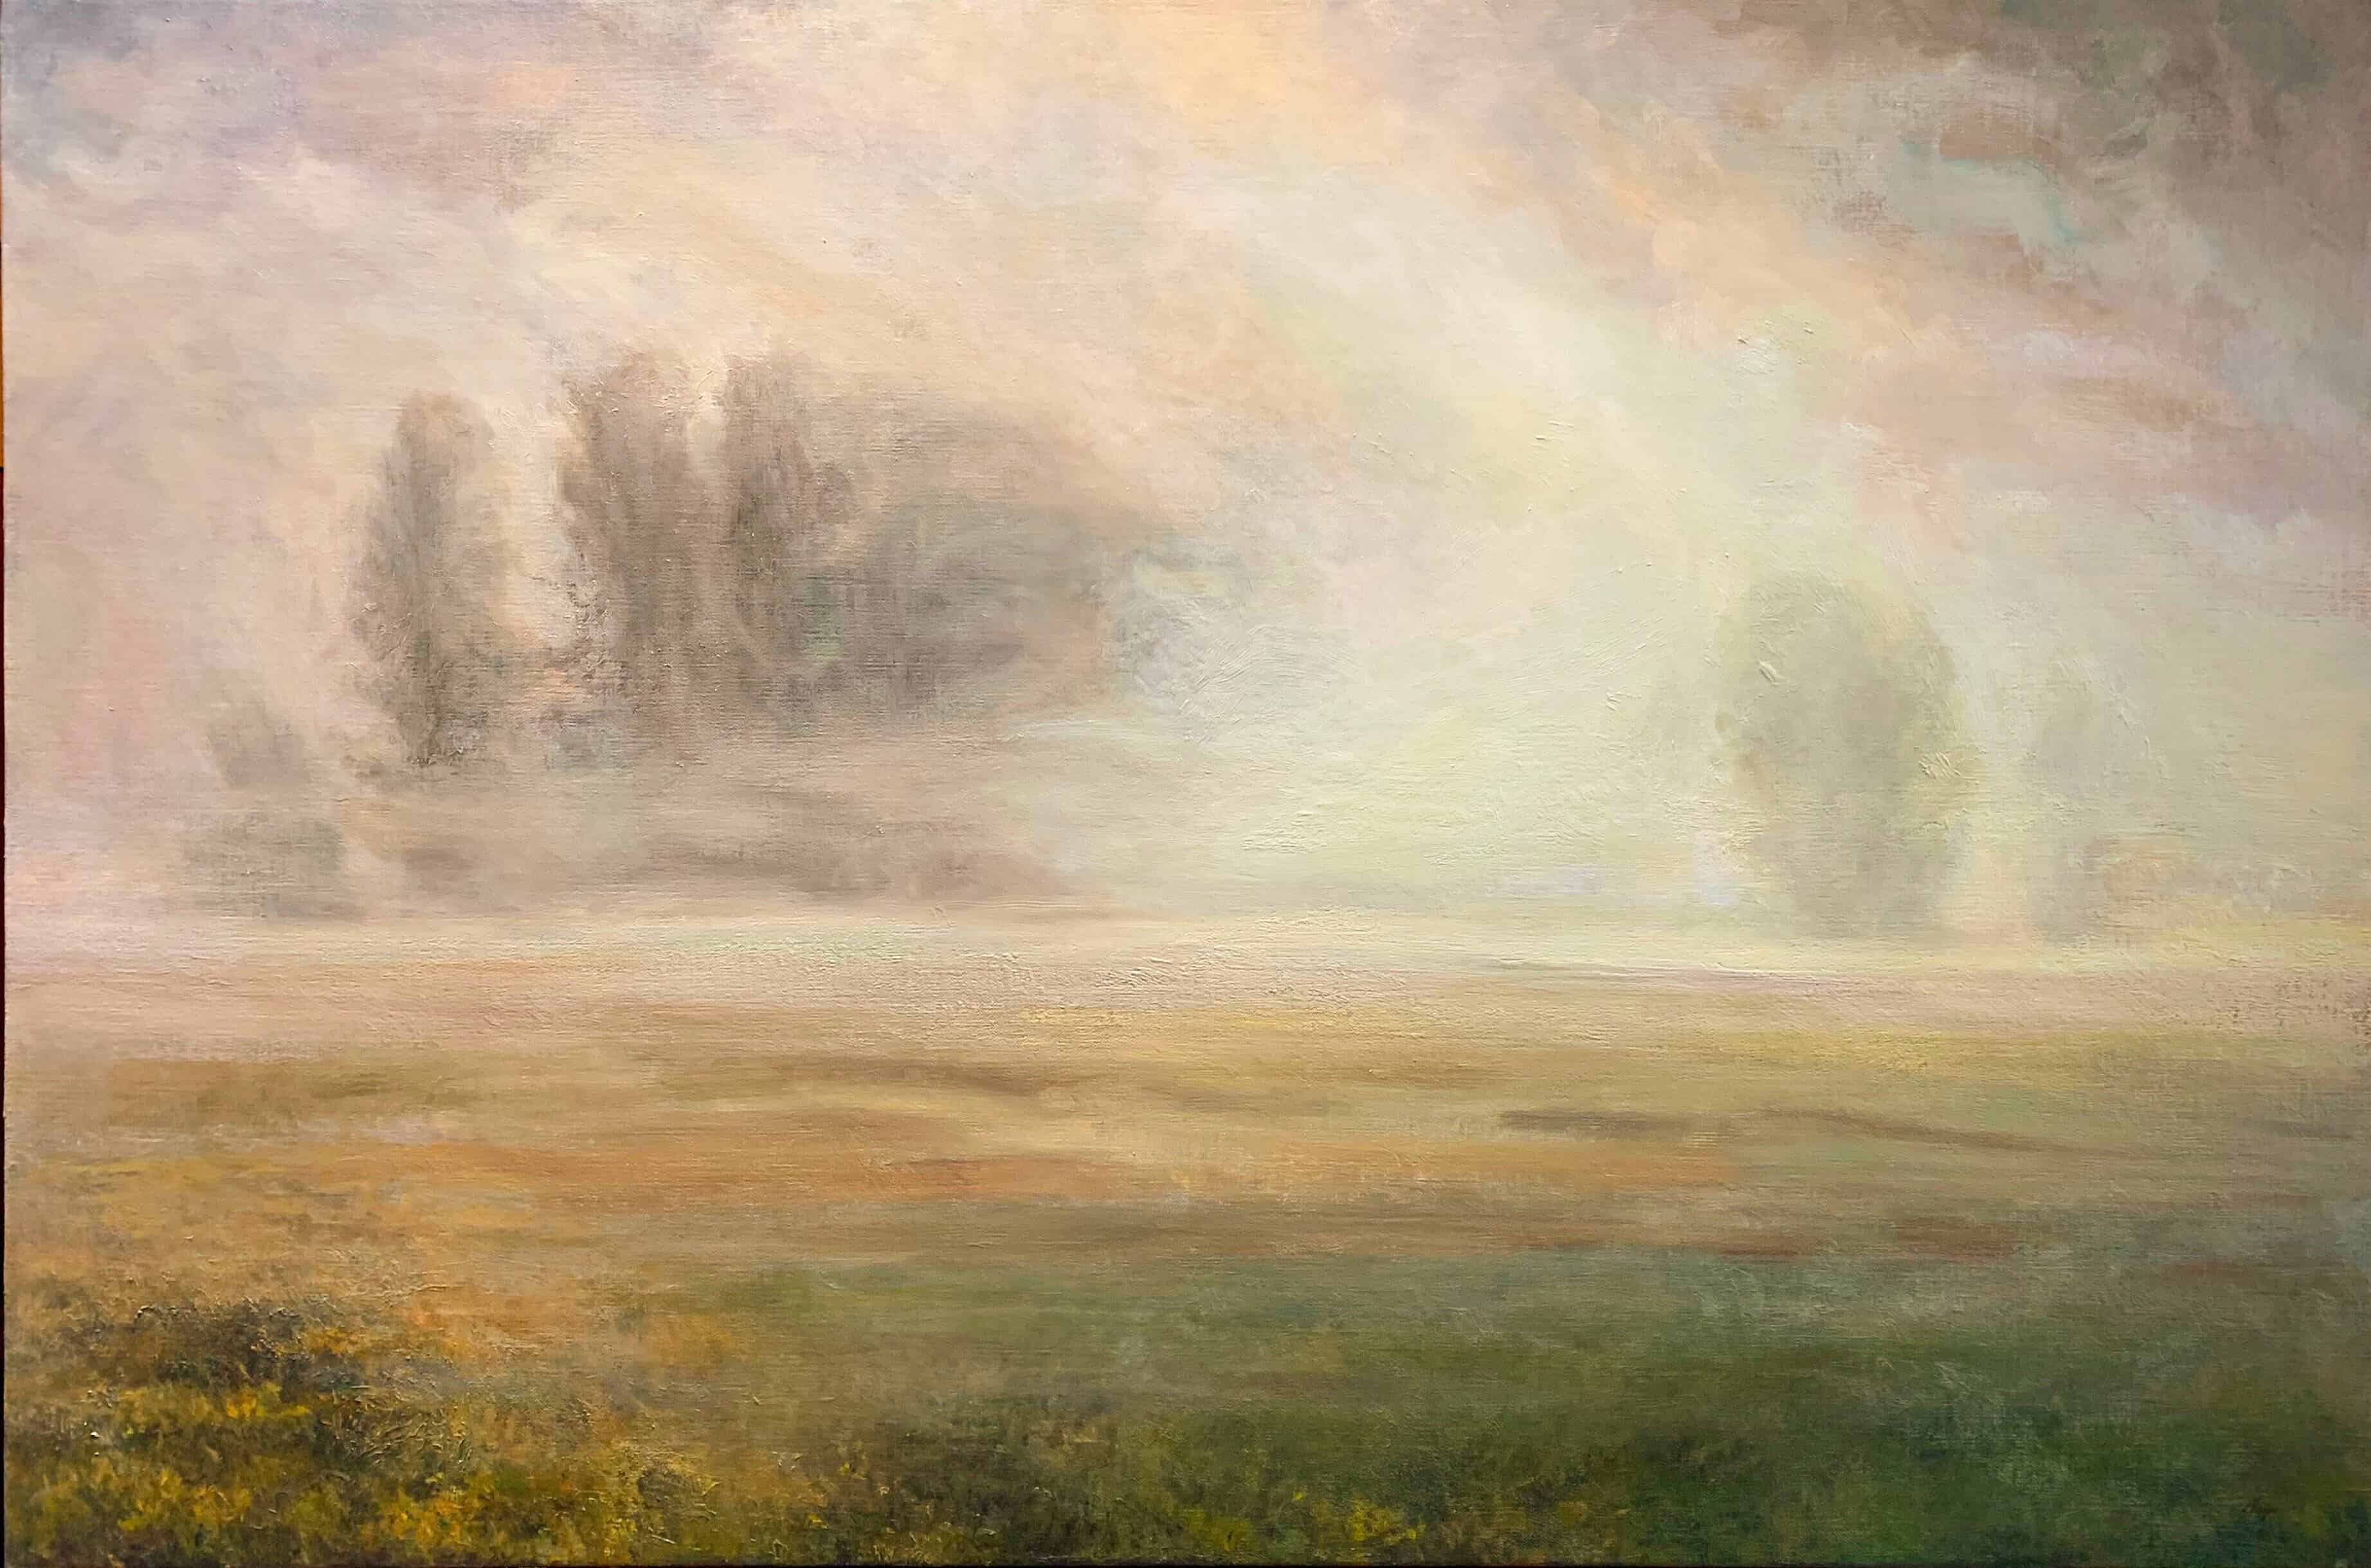 Contemporary Art. Title: Morning Interlude, Oil on Canvas, 30x45 in by Canadian artist Liza Visagie.